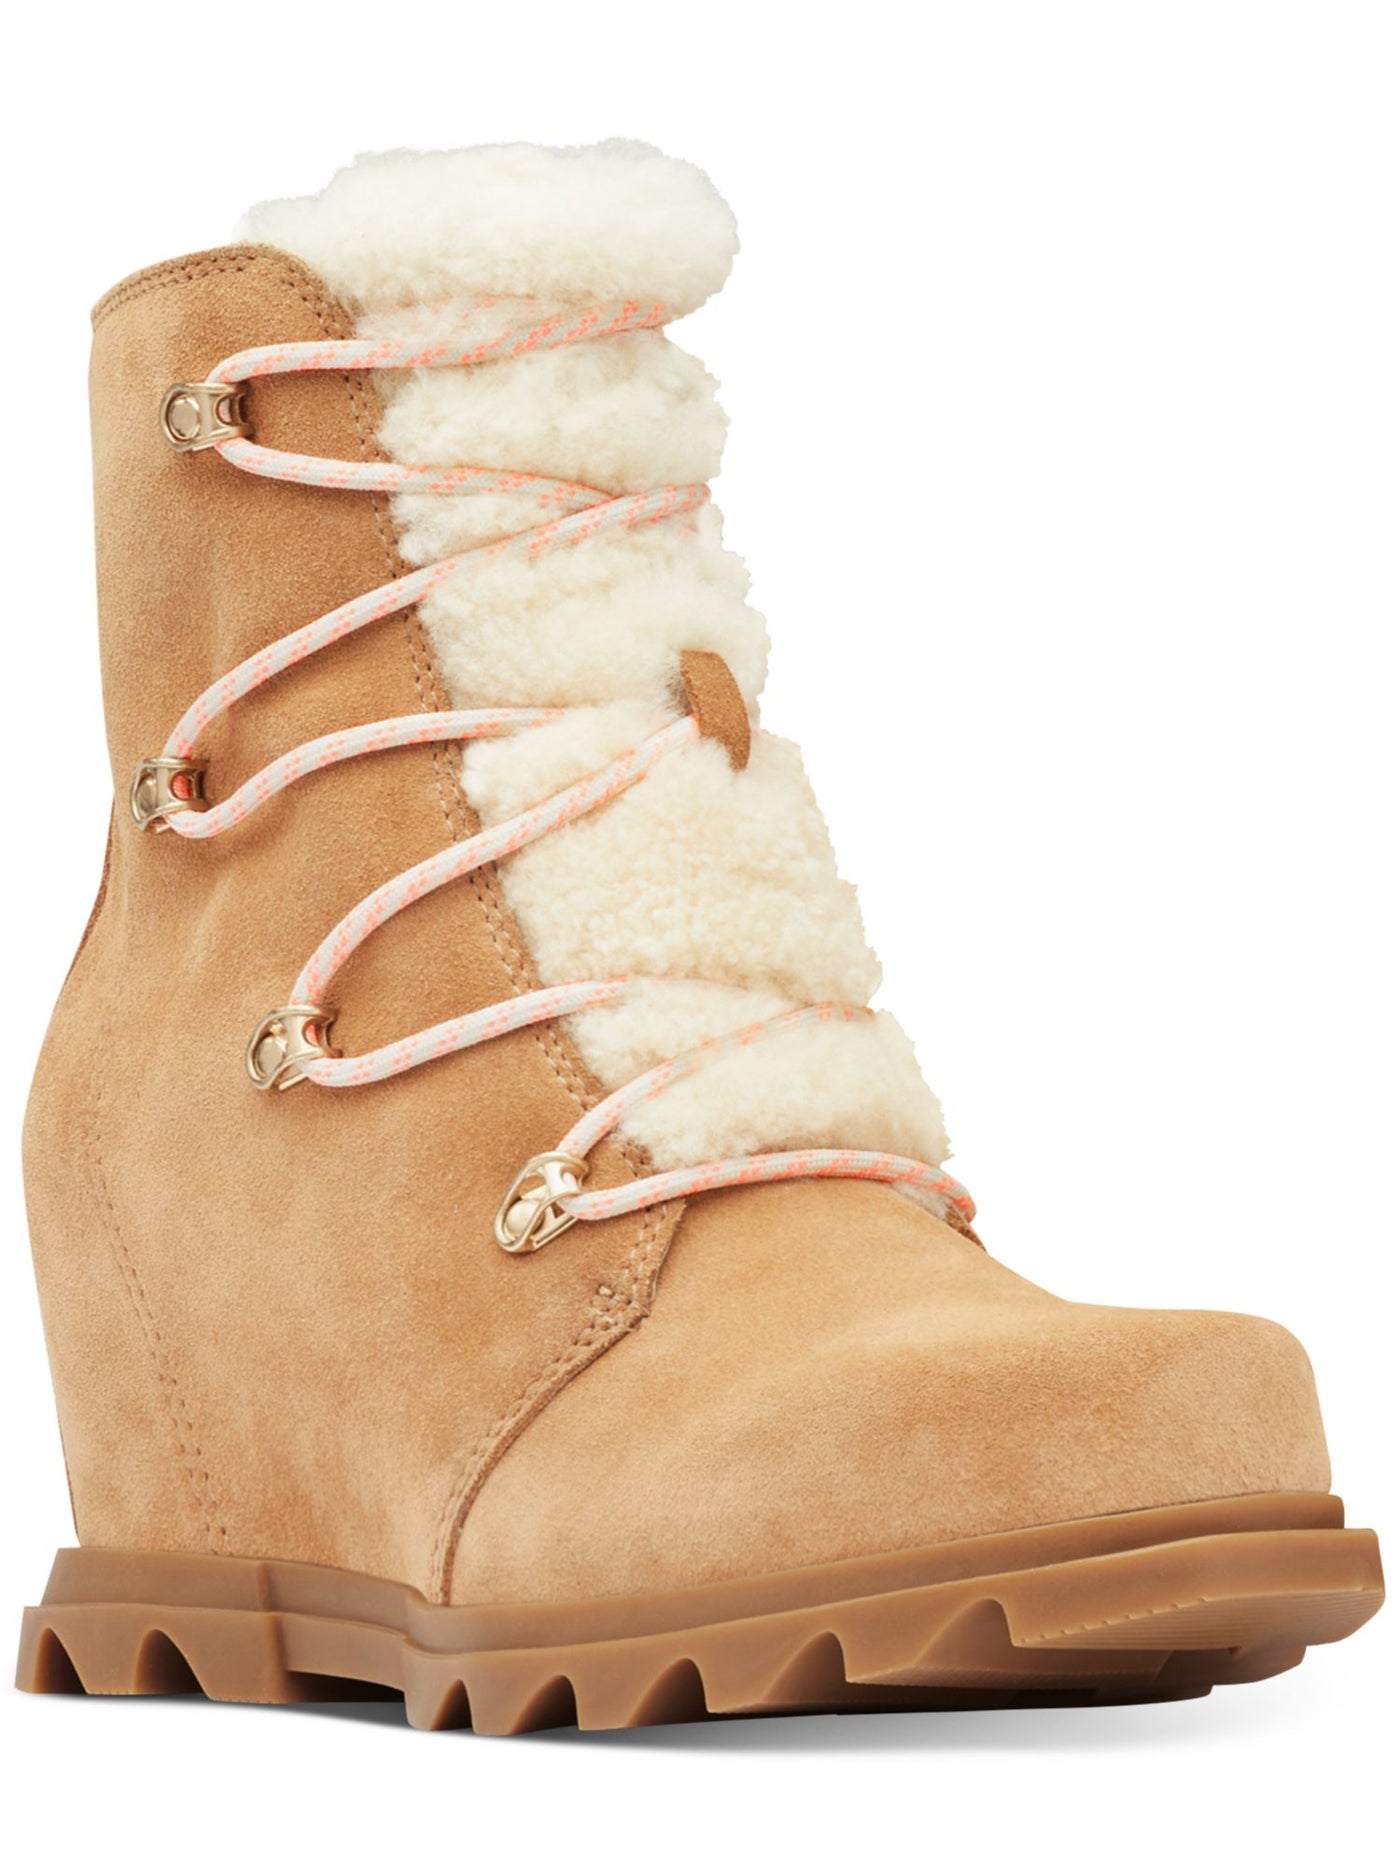 SOREL Womens Beige Shearling Tongue Padded Round Toe Lace-Up Leather Booties 5.5